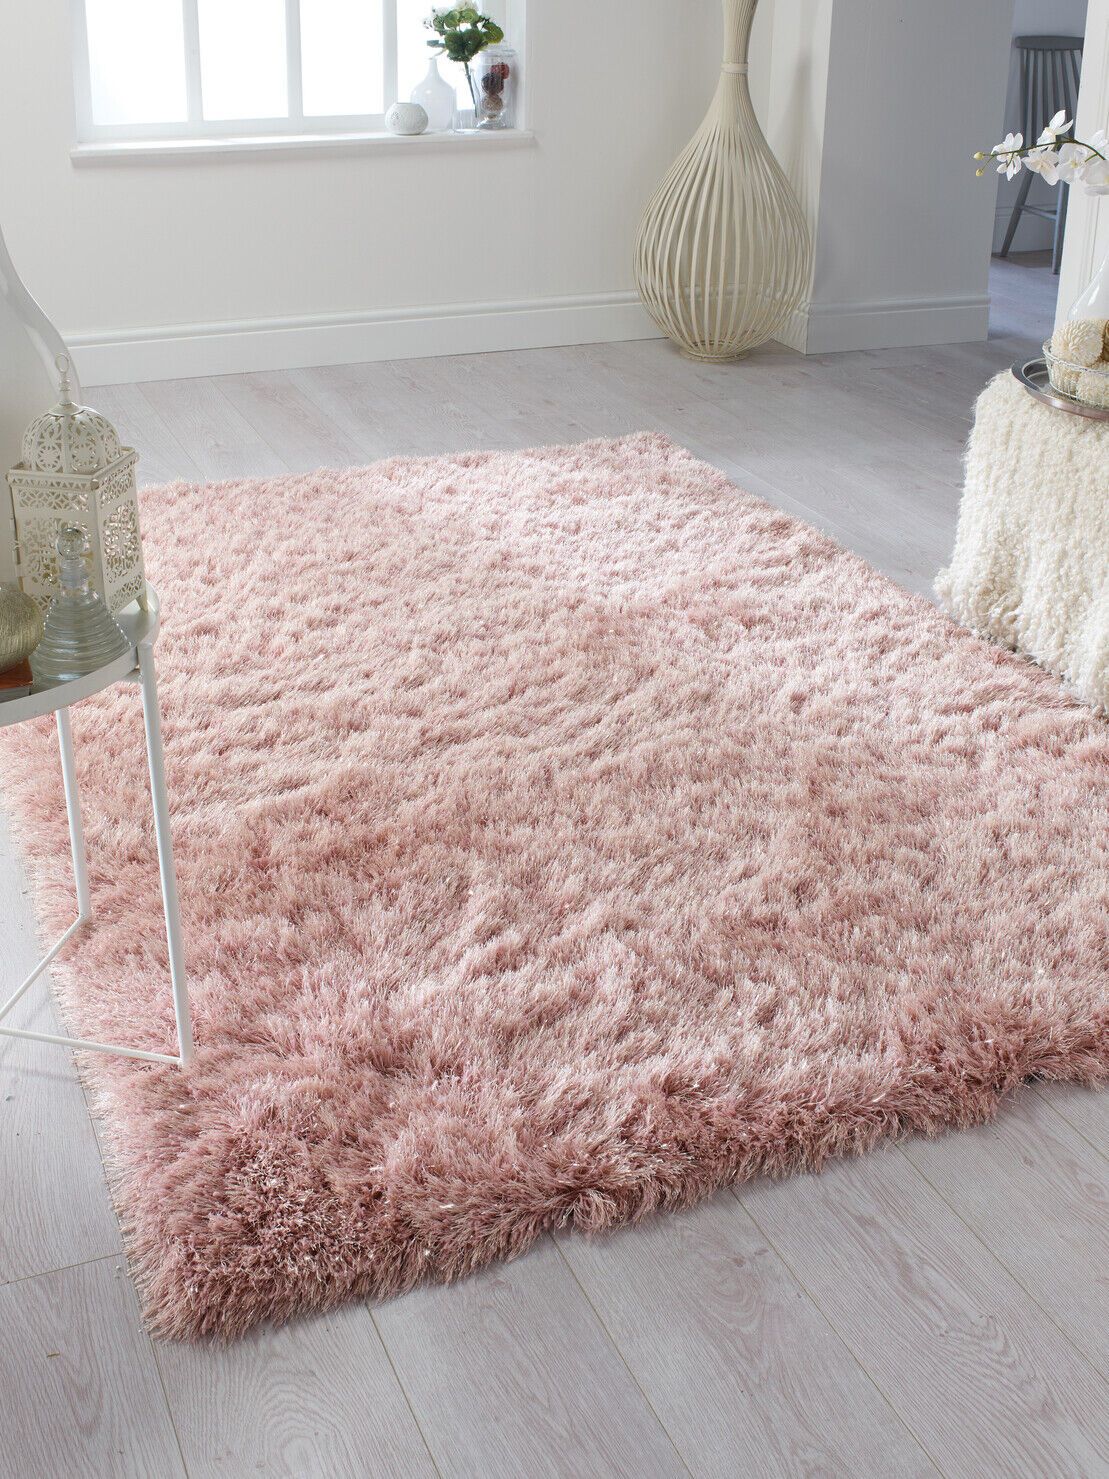 Dazzle Soft Fluffy Silky Shaggy Blush Pink Rug Bedroom Living Room Carpet |  Ebay Throughout Pink Soft Touch Shag Rugs (Photo 15 of 15)